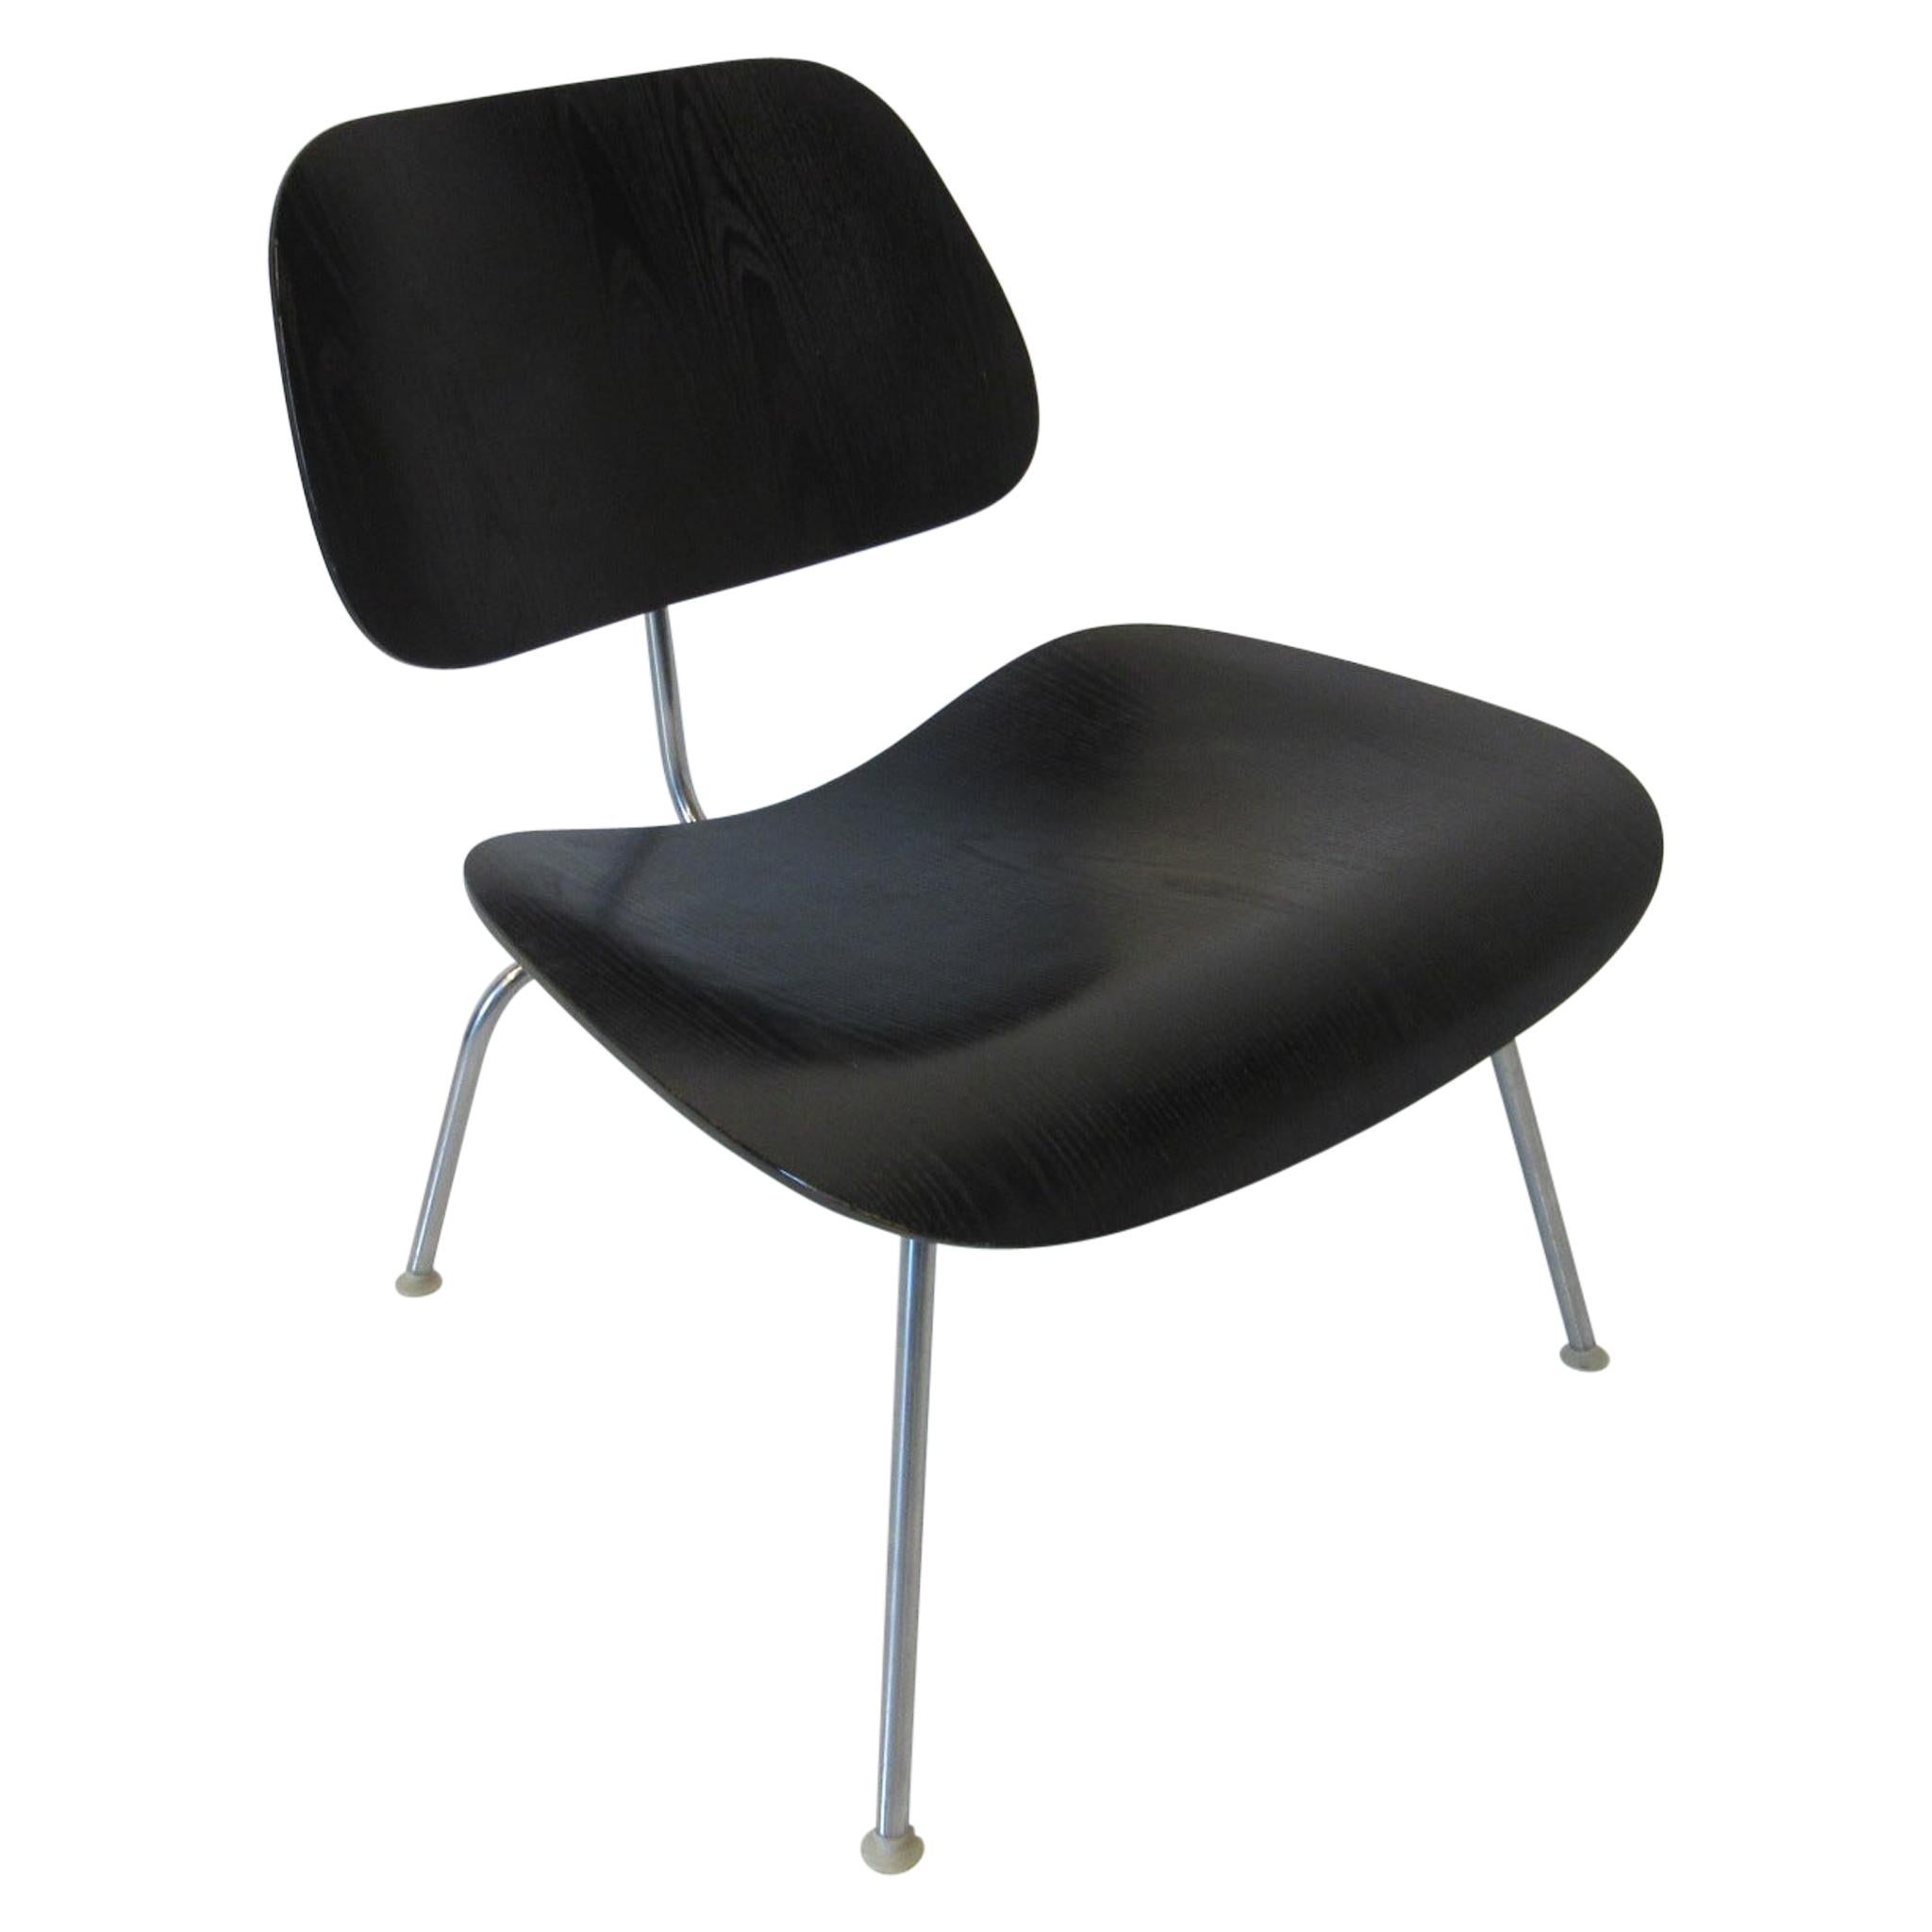 Eames LCM Plywood Low Lounge Chair by Herman Miller